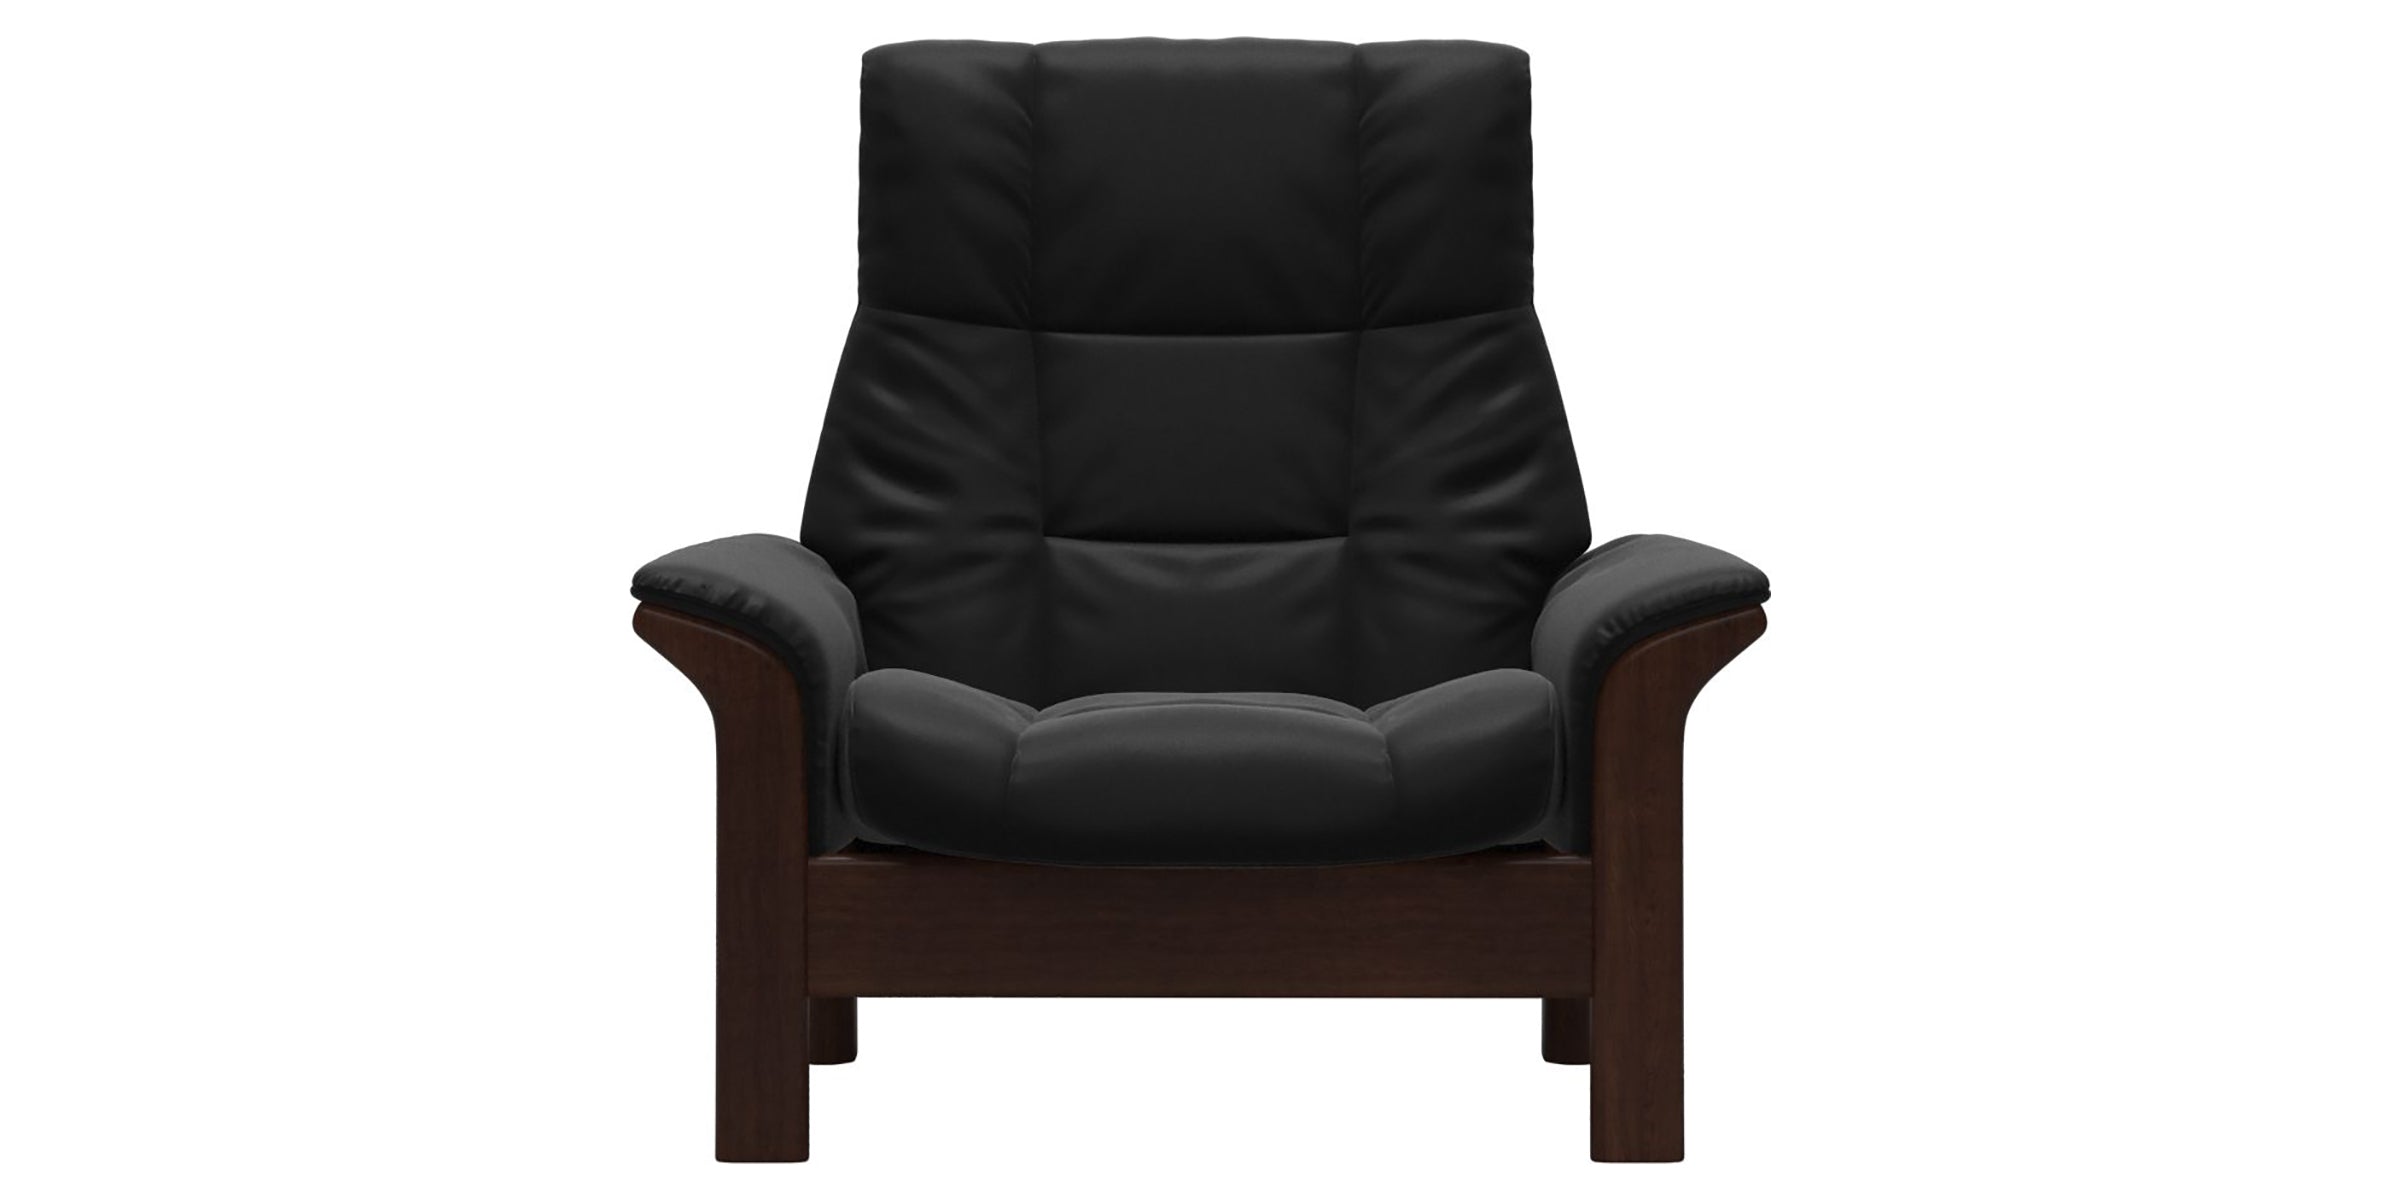 Paloma Leather Black and Brown Base | Stressless Buckingham High Back Chair | Valley Ridge Furniture